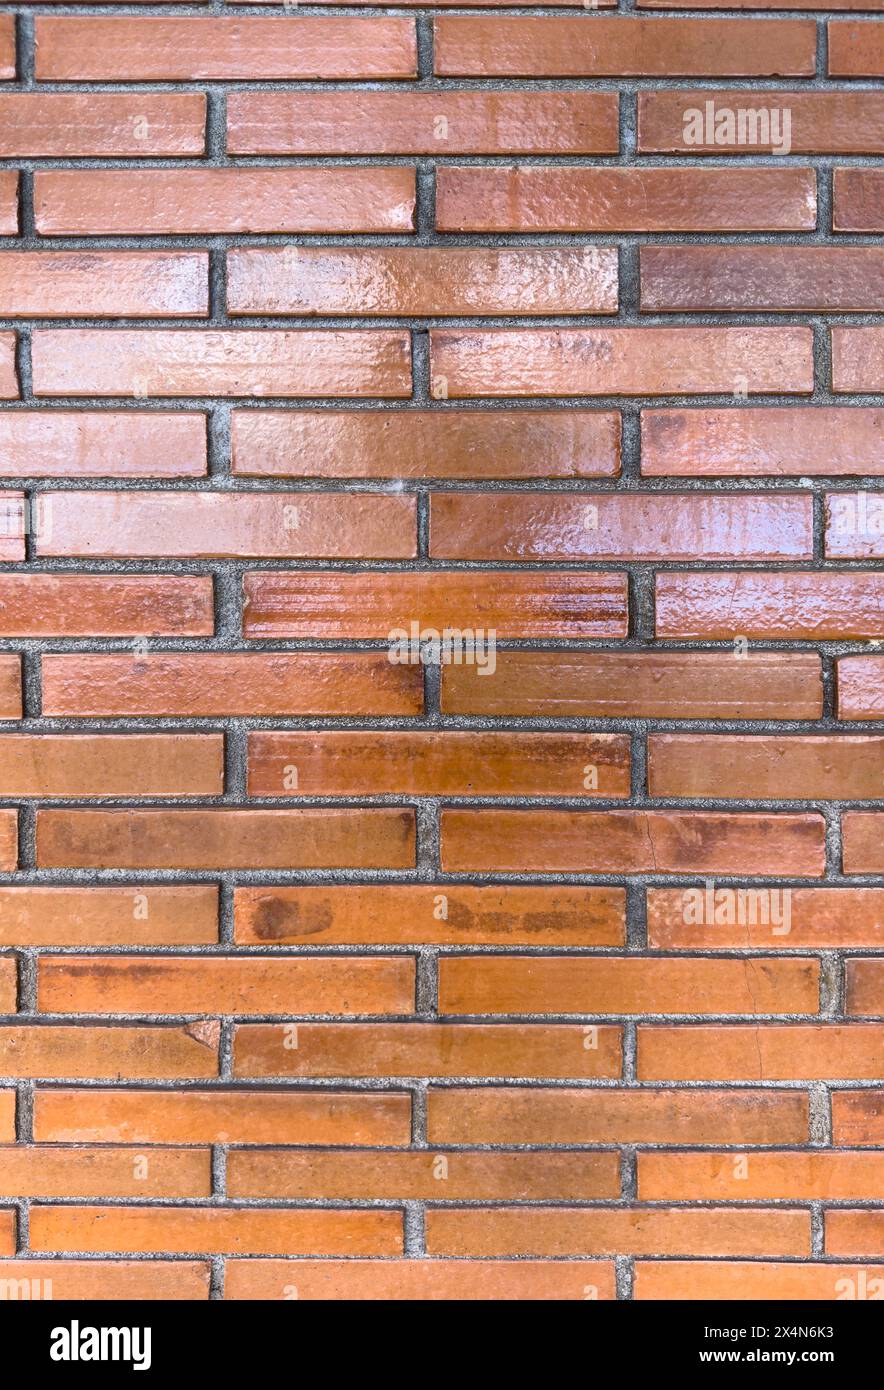 Red glossy brick wall background close up view Stock Photo